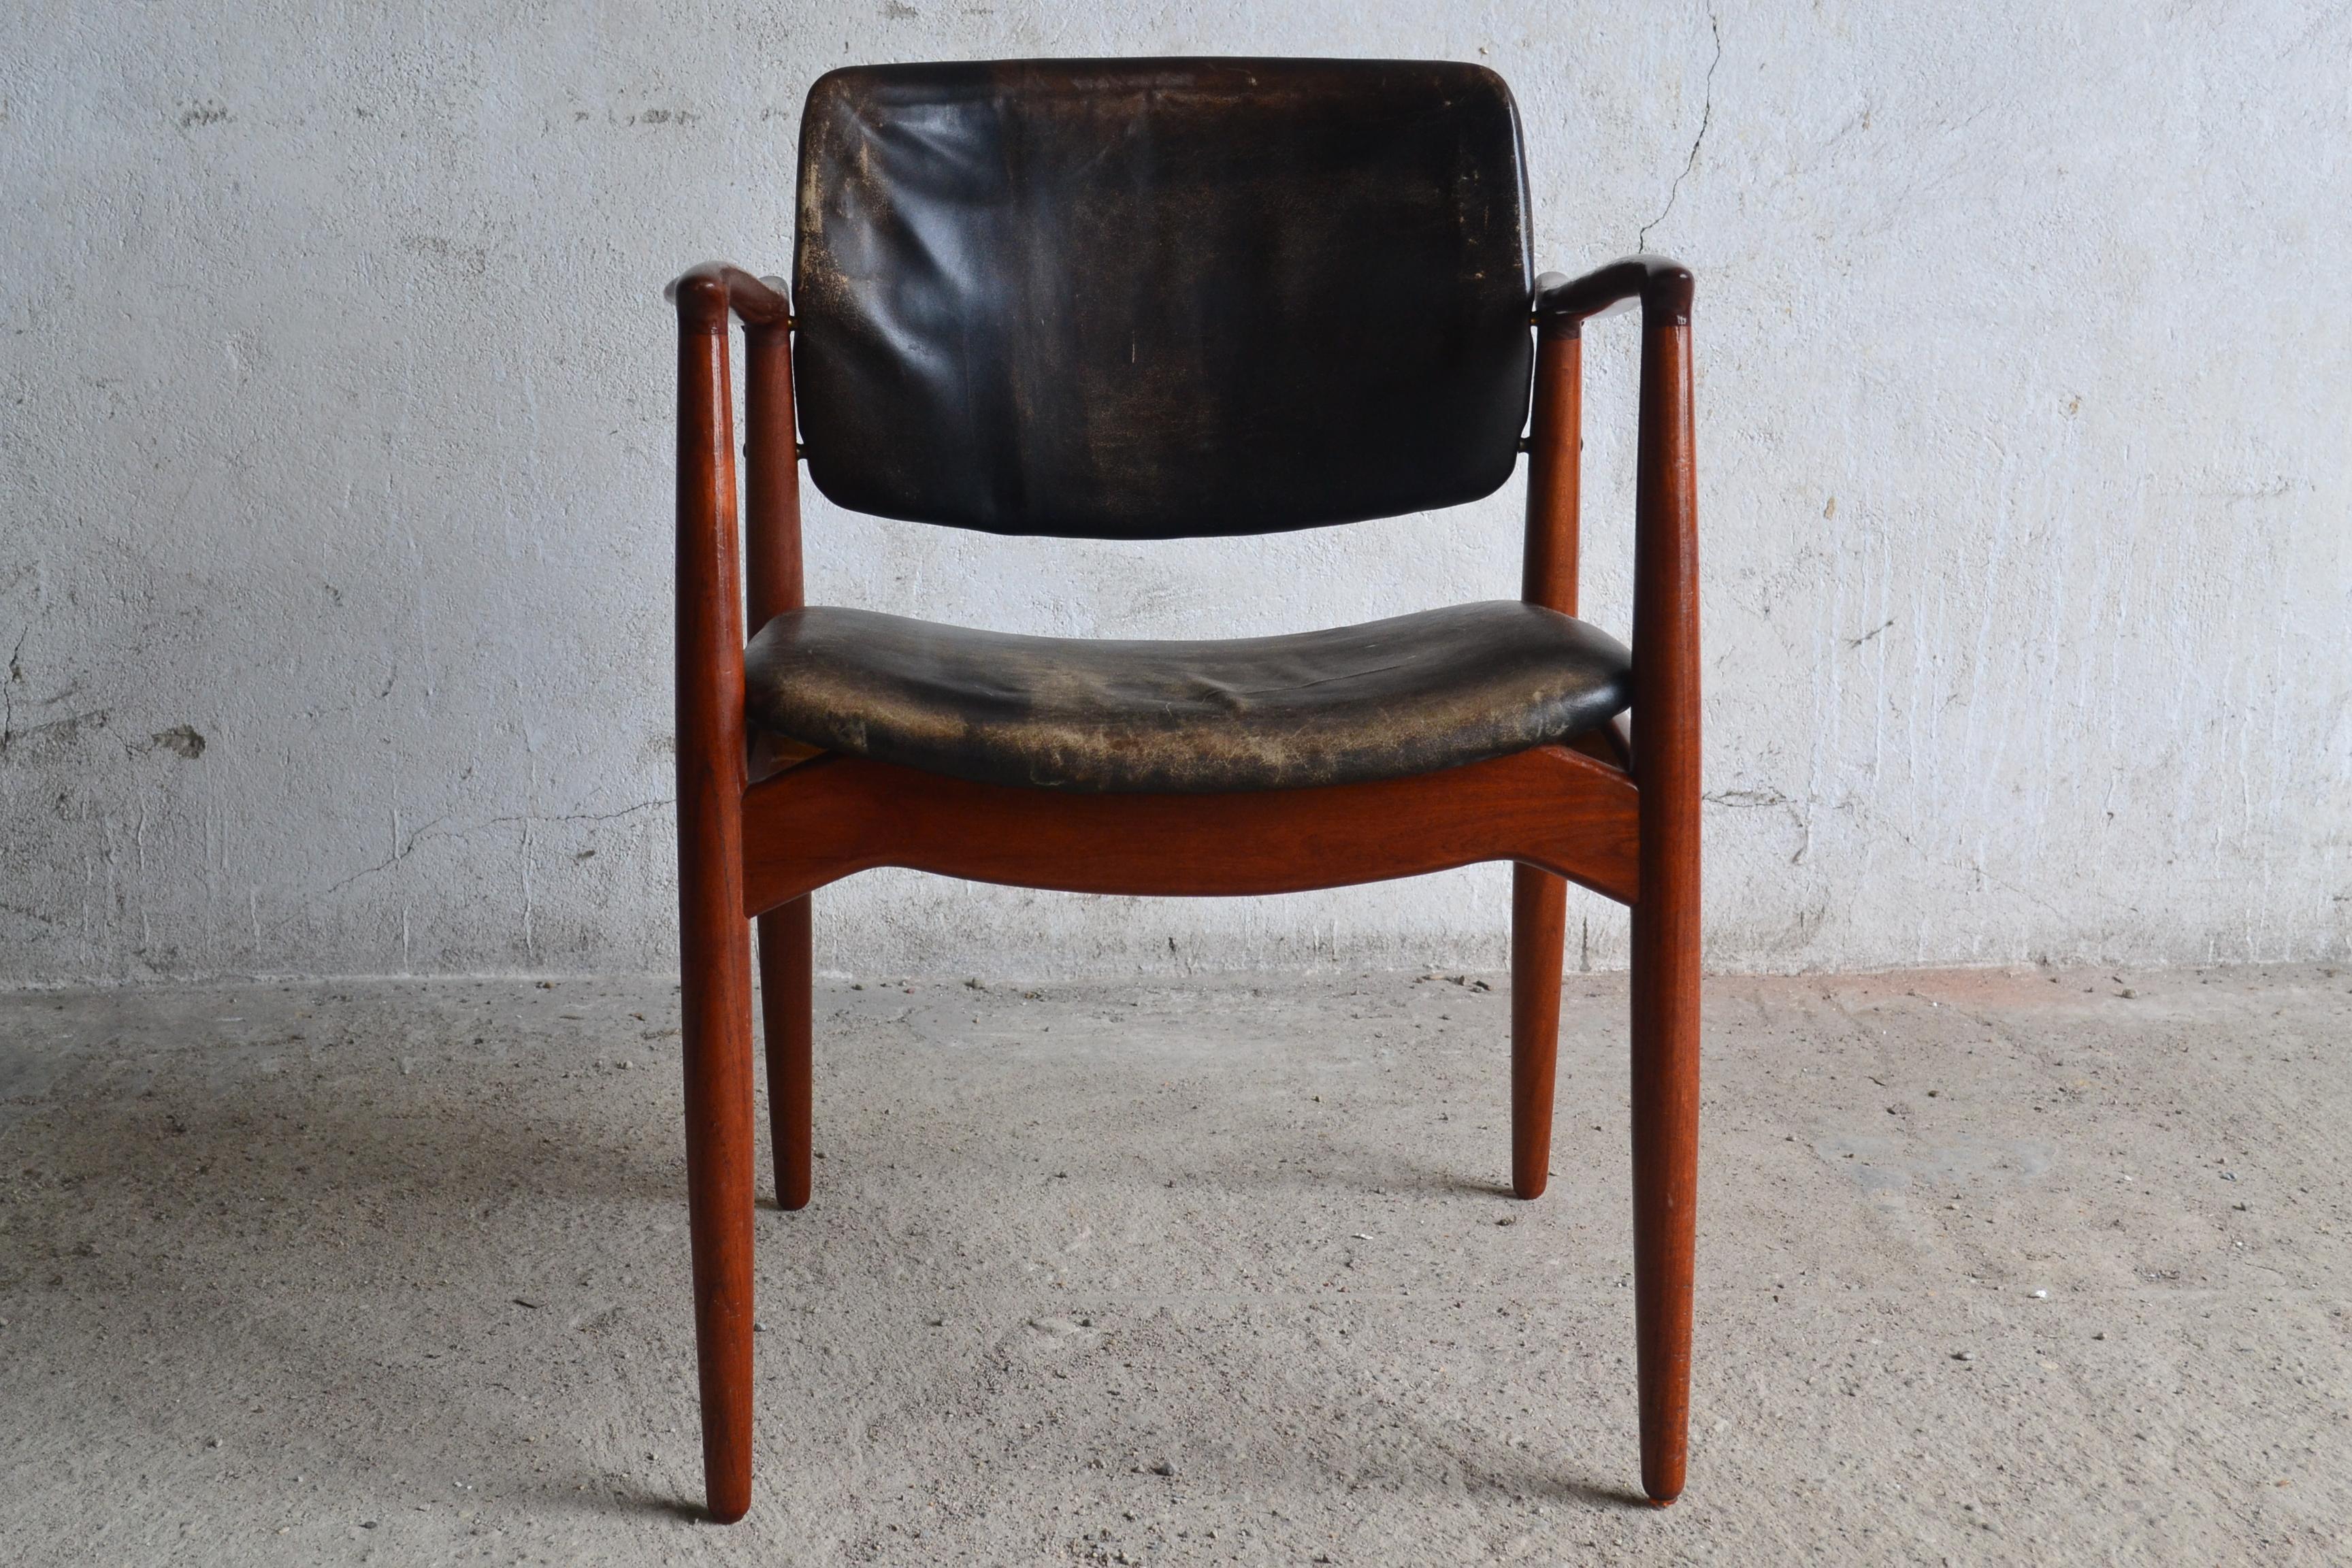 This model 67 armchair was designed by Erik Buch in the 1960s and is in original condition with no tears and cracks.